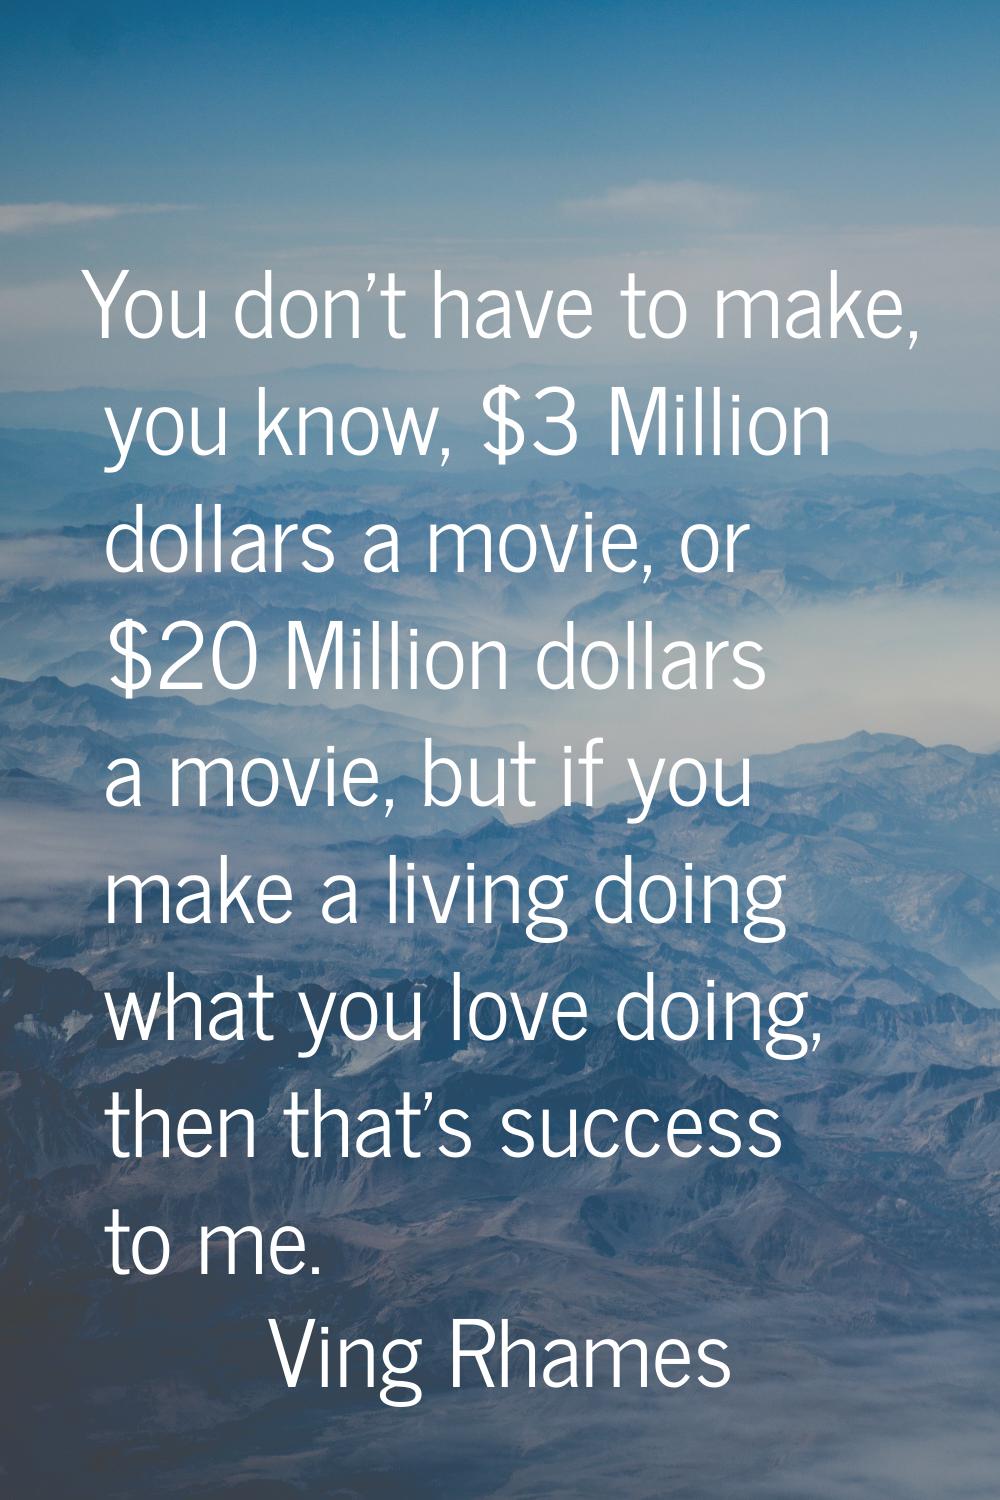 You don't have to make, you know, $3 Million dollars a movie, or $20 Million dollars a movie, but i